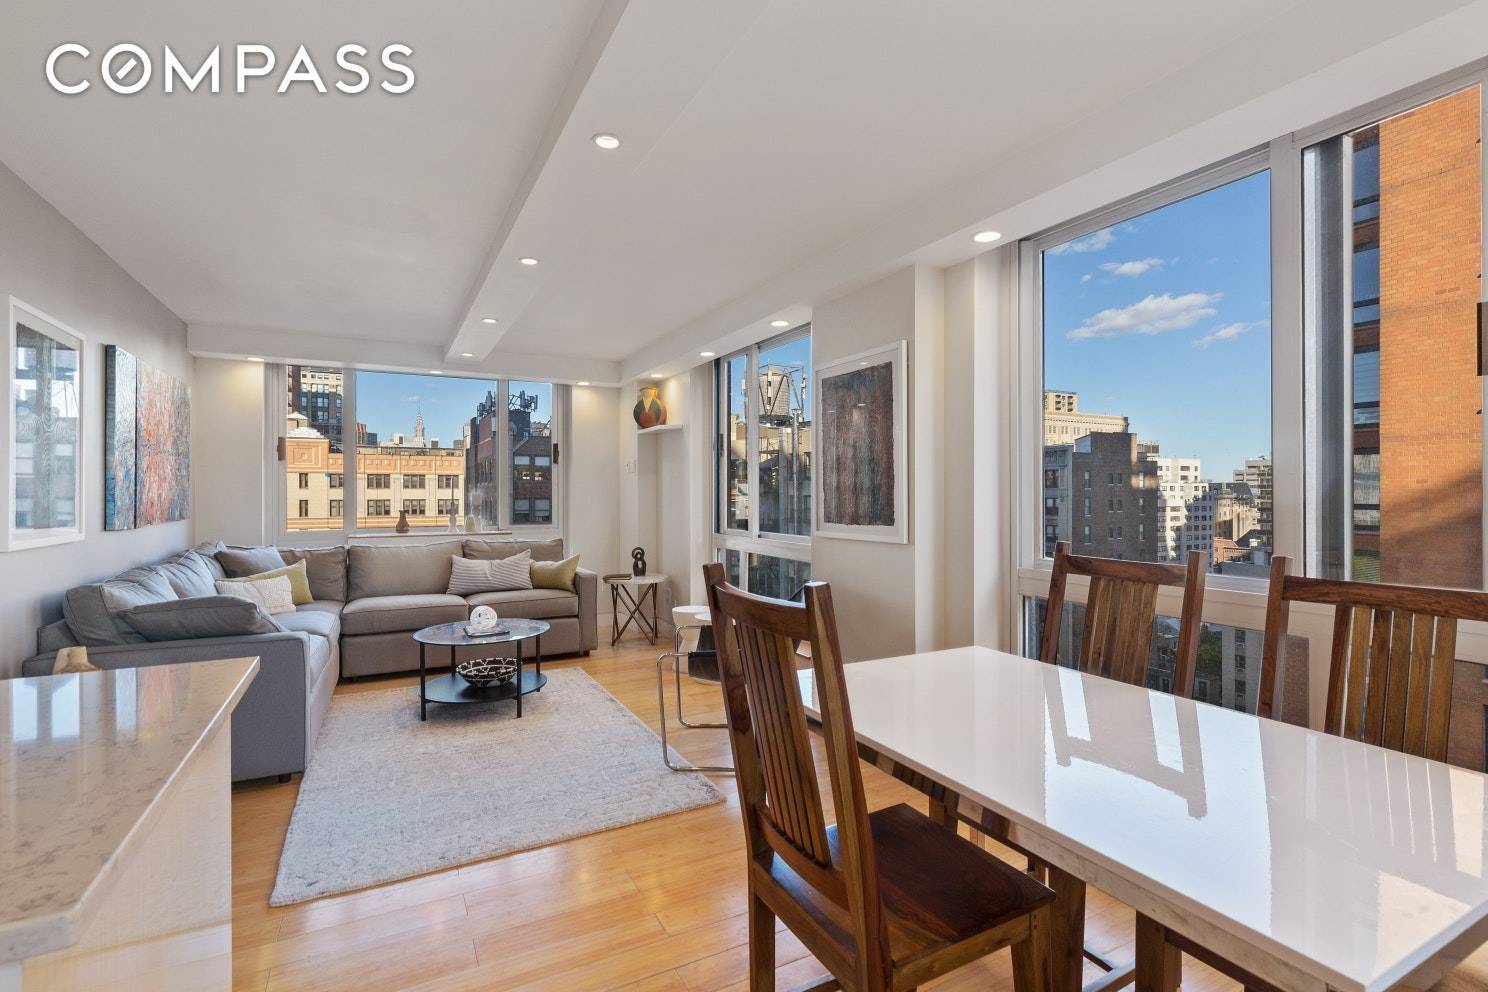 This rarely available corner 3 bedroom office area at the Zeckendorf Towers condominium offers incredible light through ten oversized windows facing north, south and east.